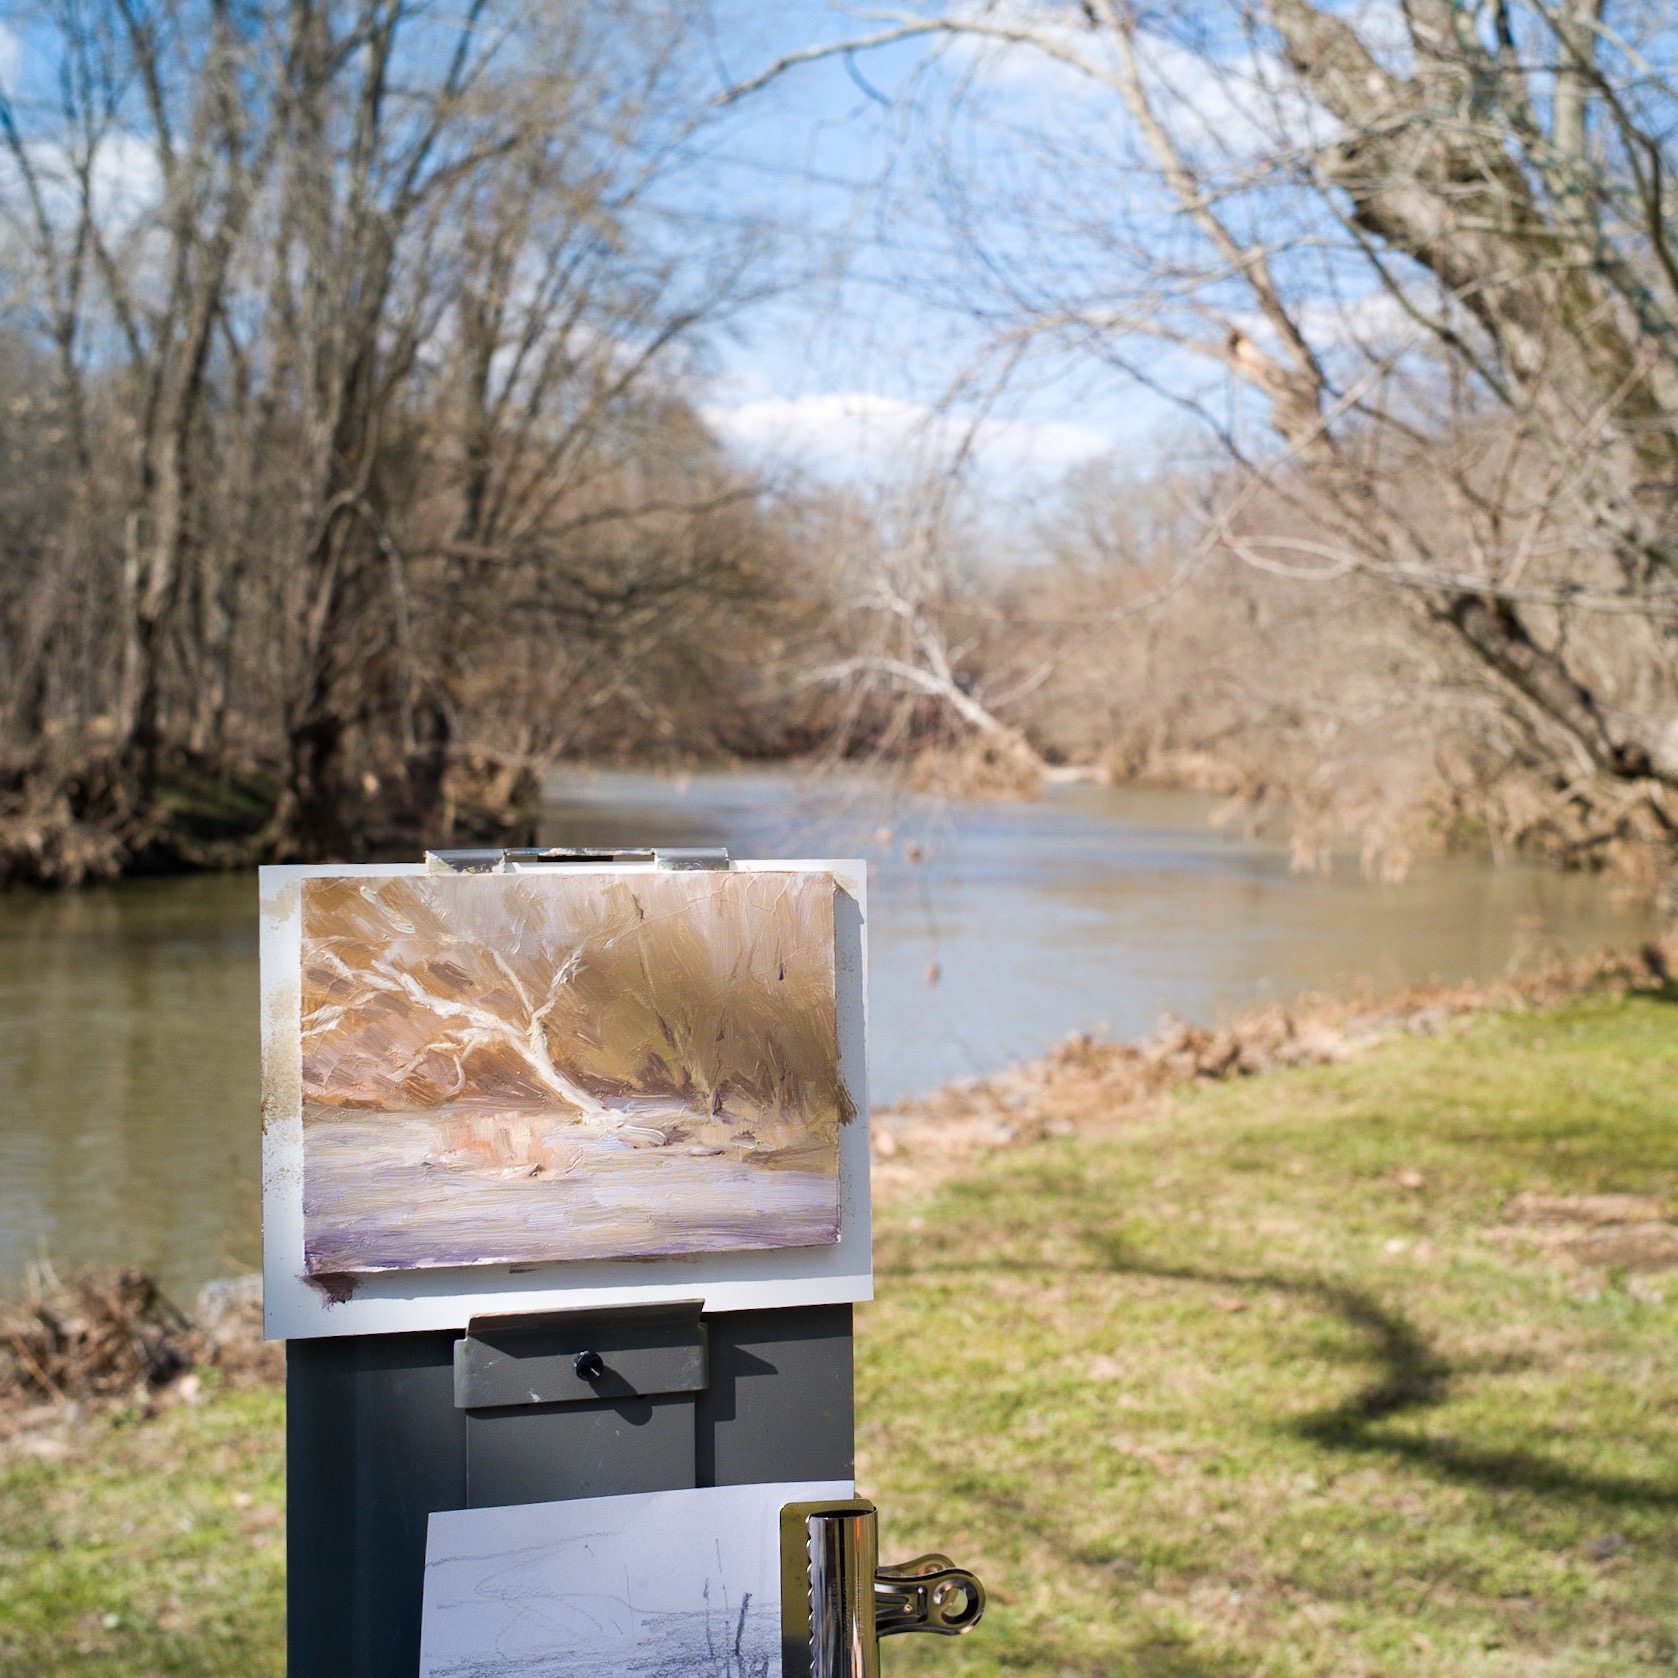   Painting by Daniel Chow. Brandywine River. Oil on panel, 5 by 7 inches.&nbsp;Photo by Daniel Chow  